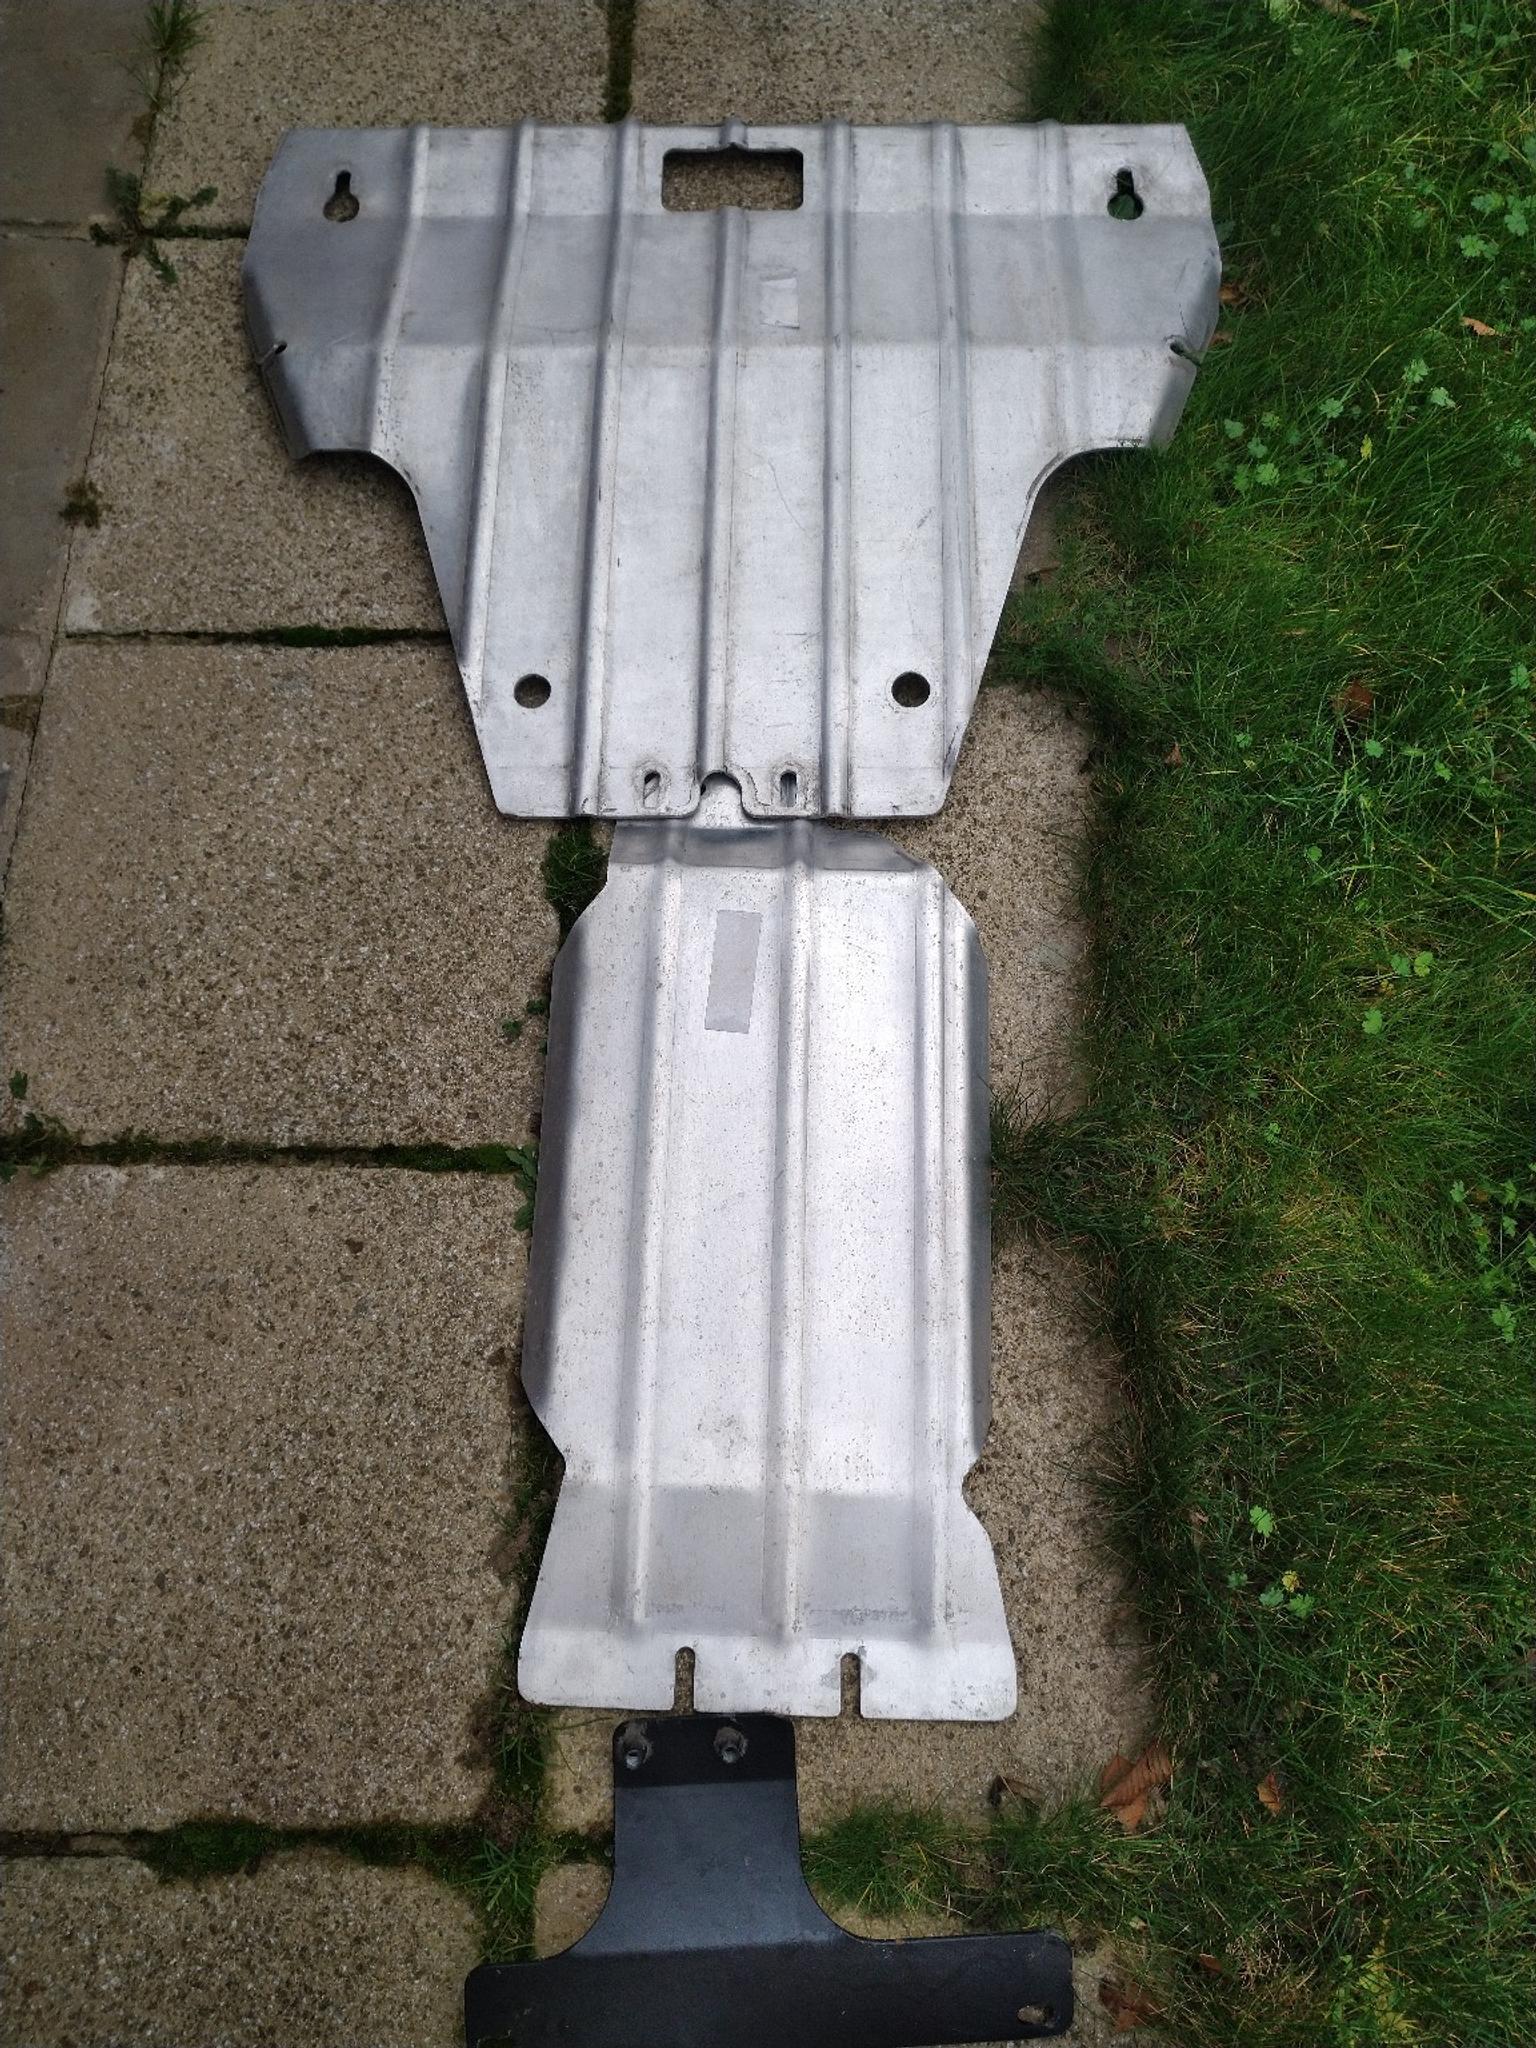 Skid plates for Subaru outback IV in IG8 London for £80.00